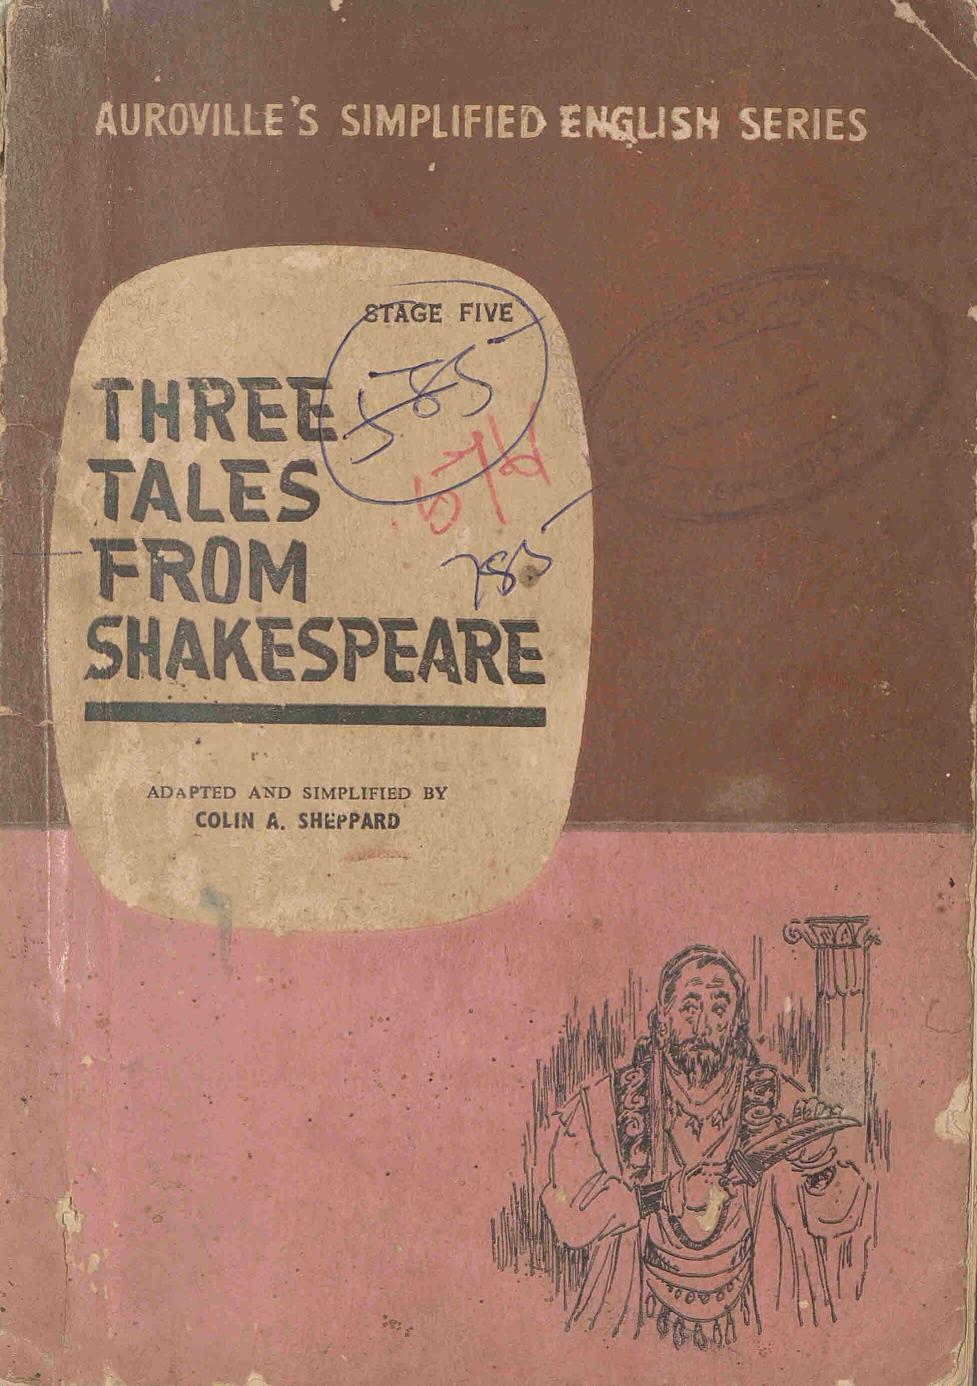 1968 - Three Tales from Shakespeare - Colin A Sheppard